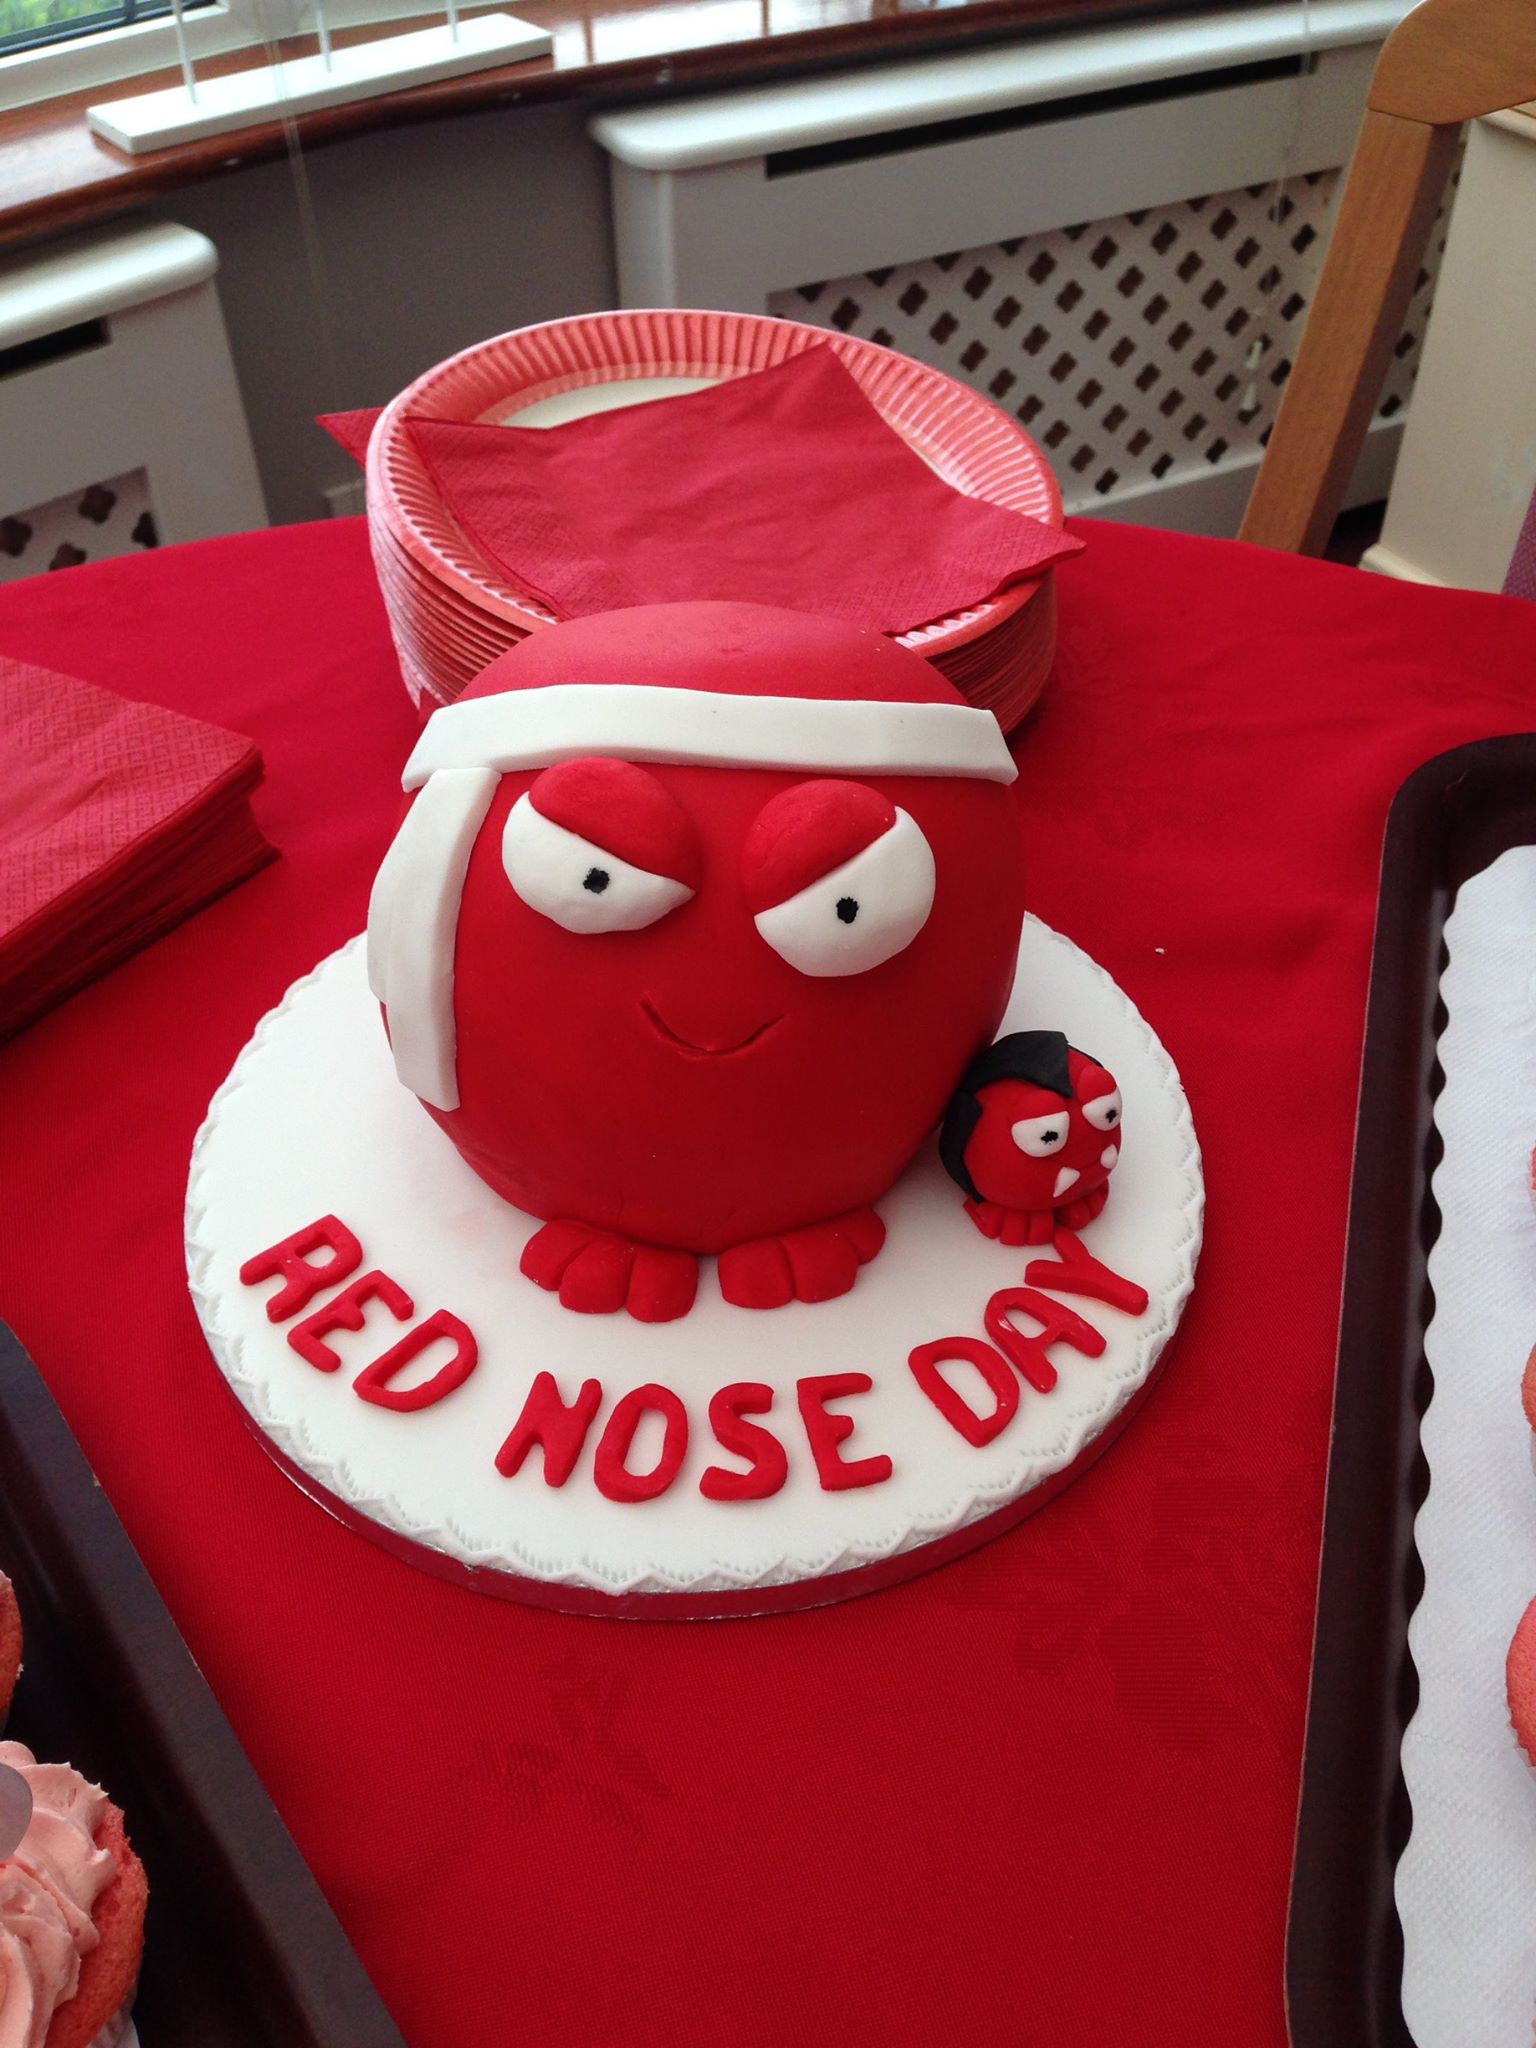 Red Nose Day cake